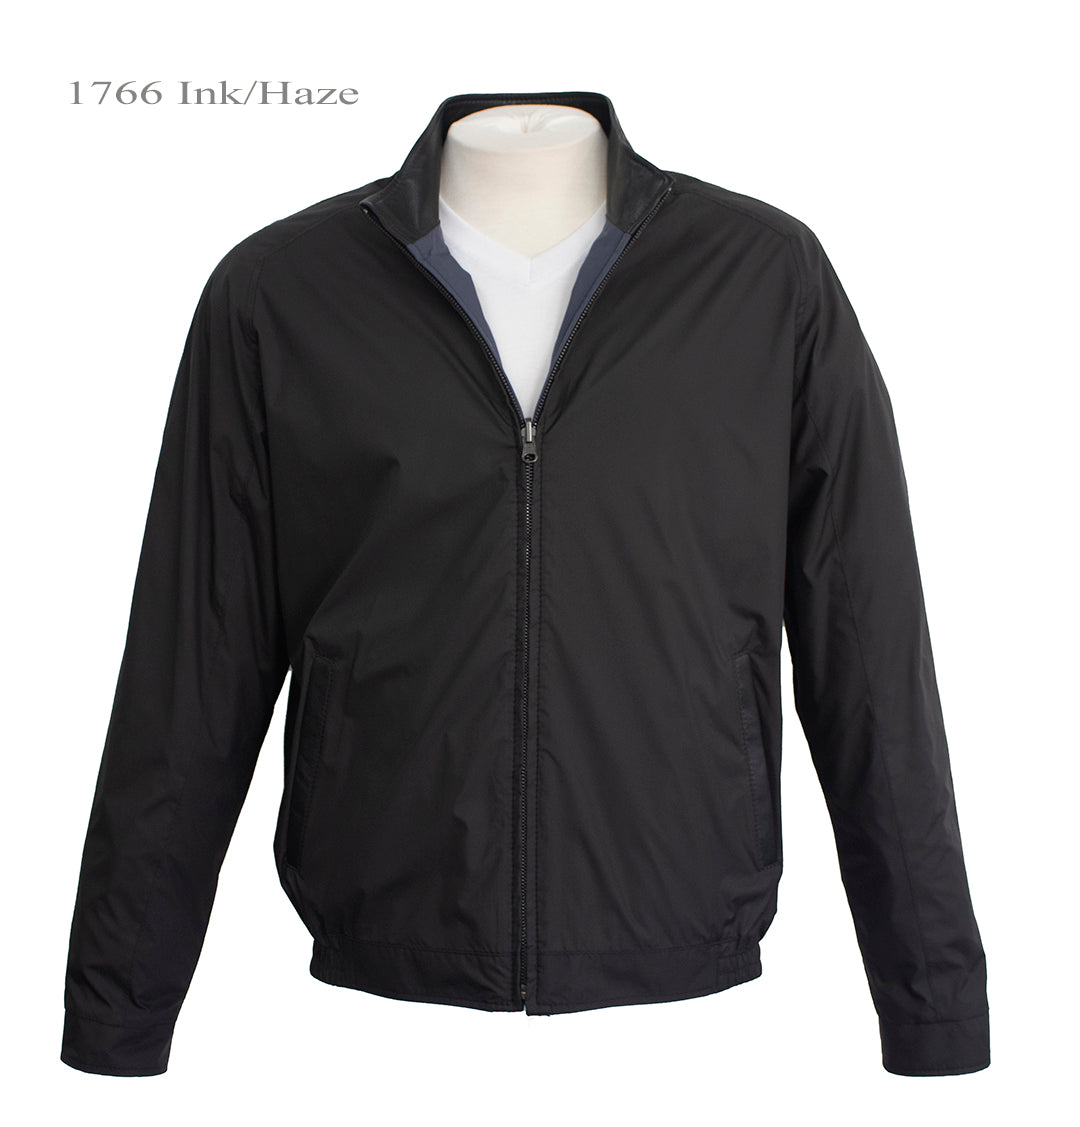 Reversible Jackets are great for Summer! – Remy Leather